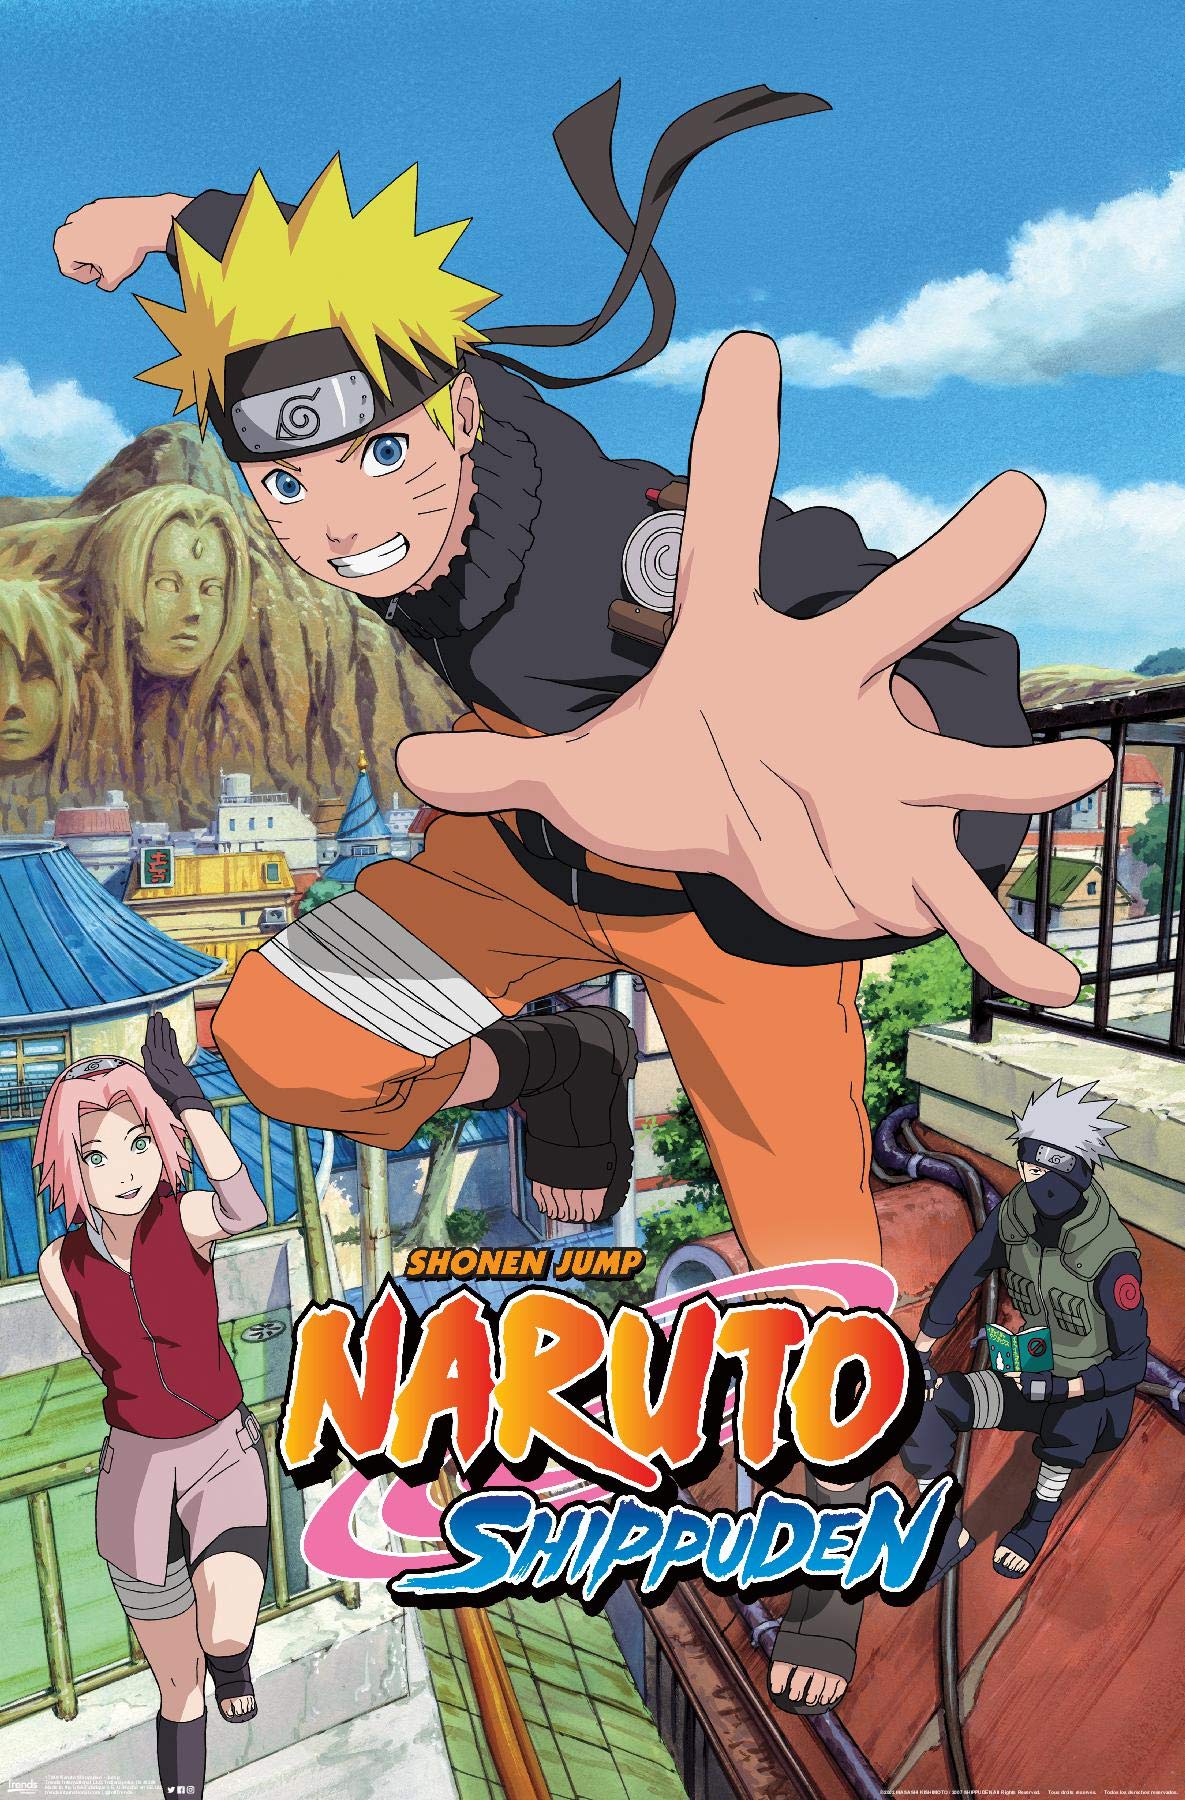 Naruto celebrates its 20th anniversary with a trailer for its new